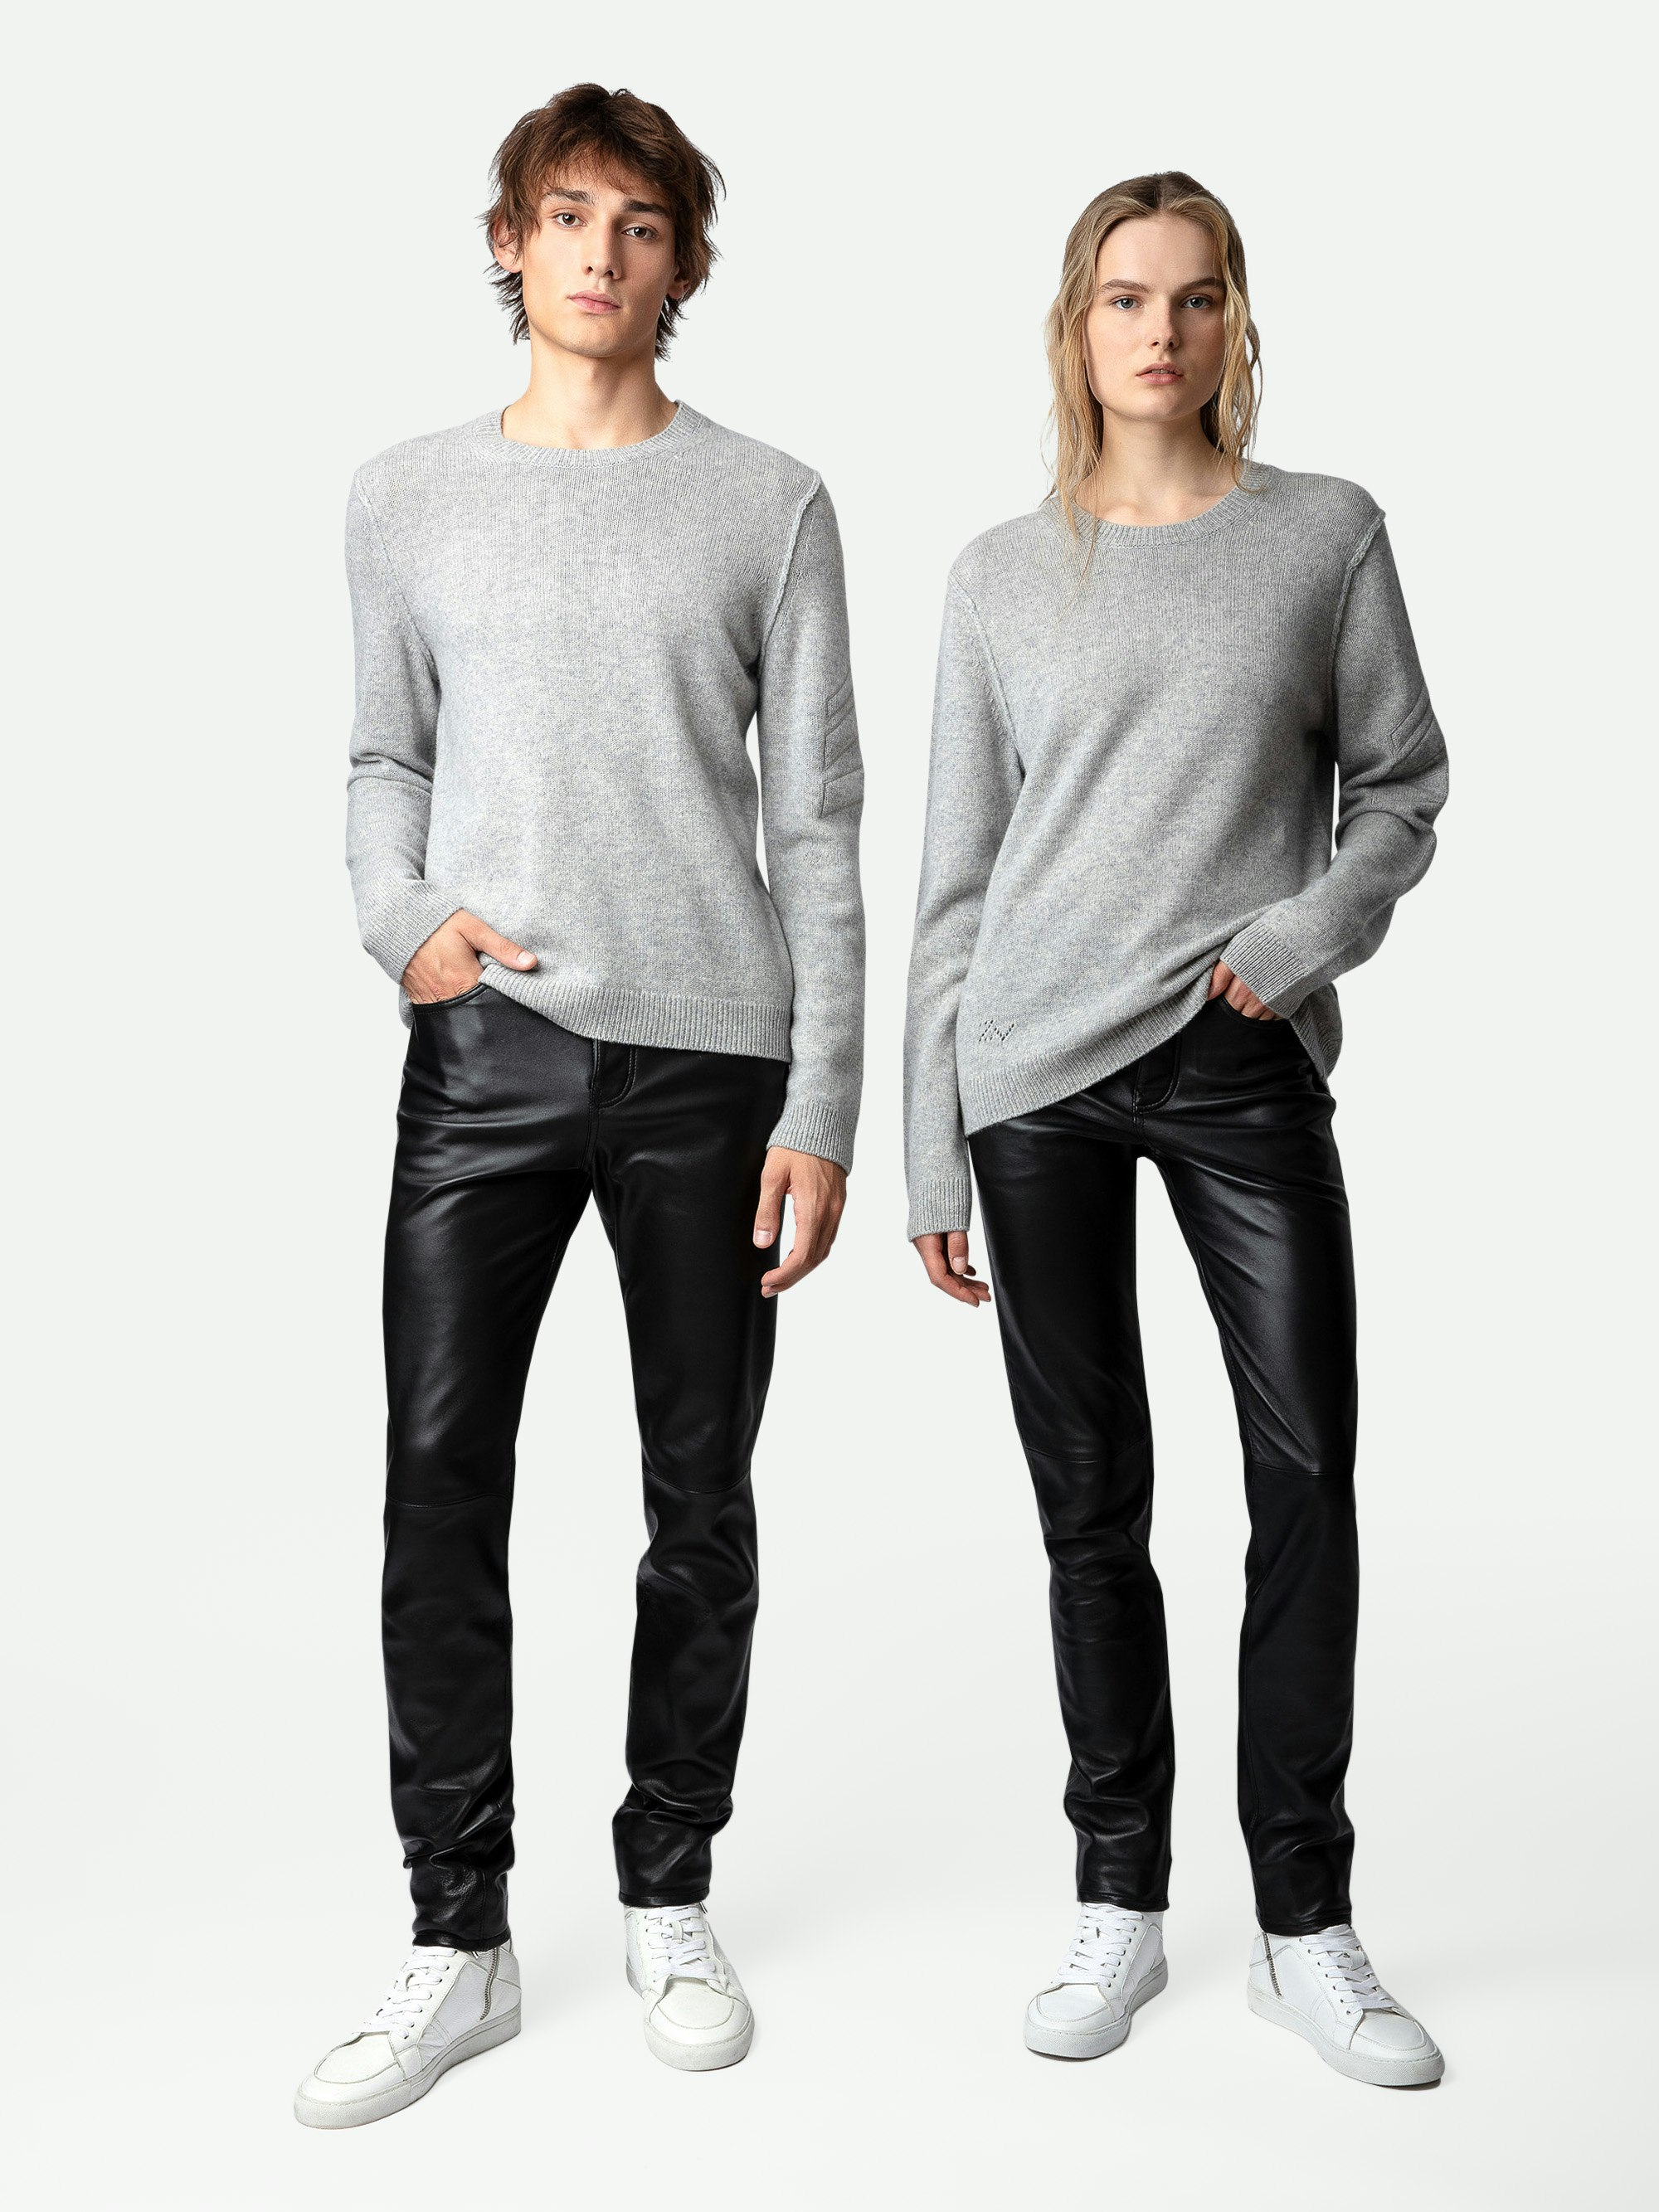 Kennedy Jumper 100% Cashmere  - Unisex's light marl grey 100% cashmere jumper with arrows on the sleeve.